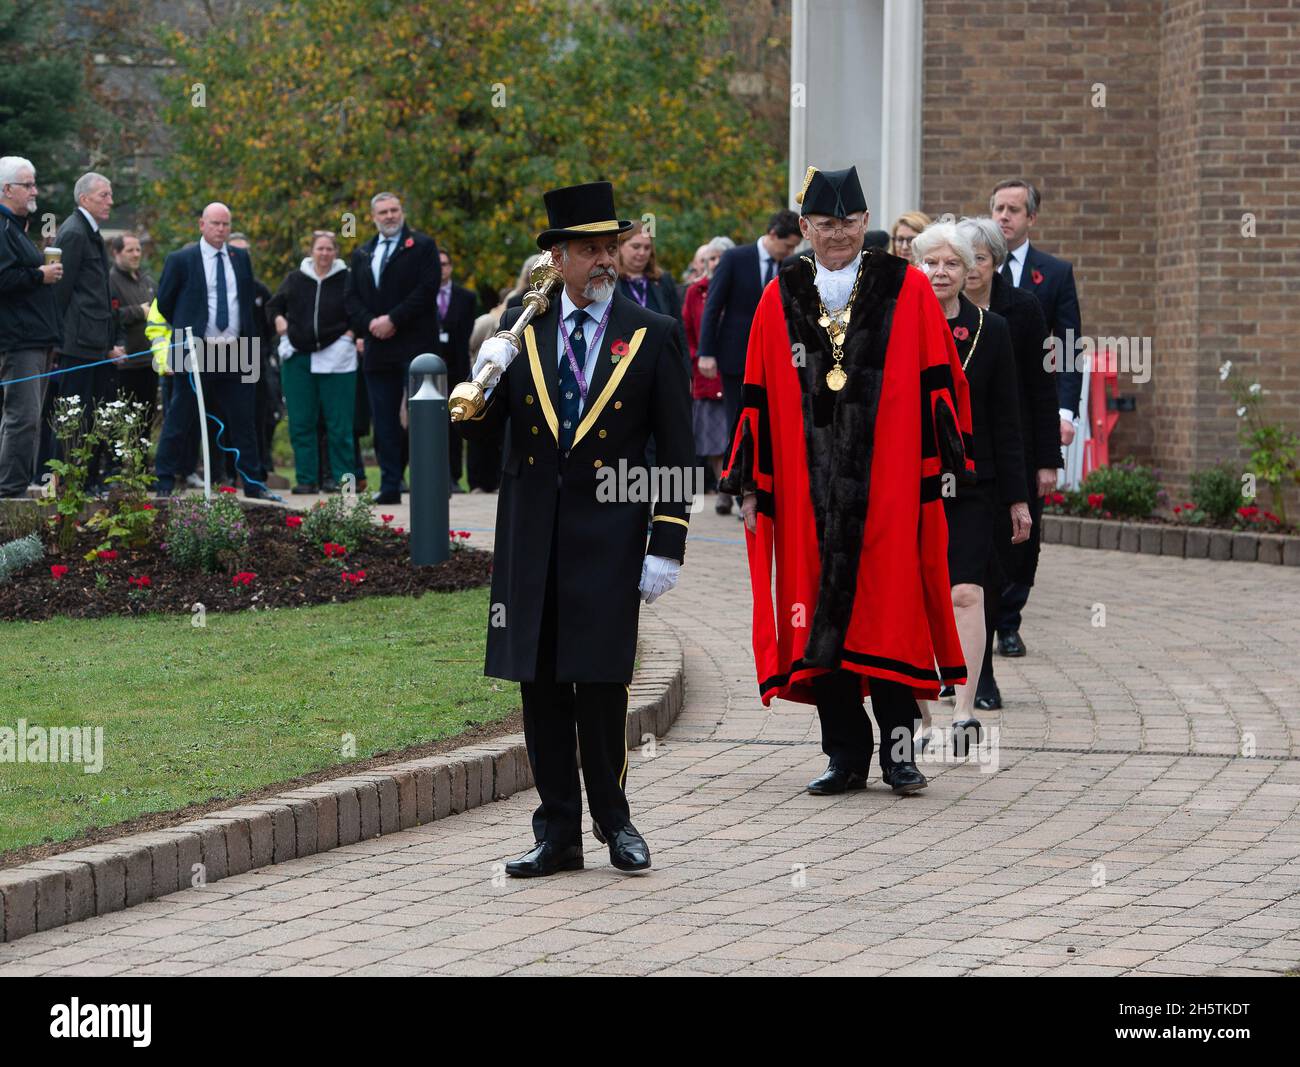 Maidenhead, Berkshire, UK. 11th November, 2021. Councillors from the Royal Borough of Maidenhead and Windsor and local residents attended a service to mark two minutes silence on Remembrance Day this morning at 11.00am. The memorial event was held outside Maidenhead Town Hall at the War Memorial. Councillor John Story, Mayor of the Royal Borough of Maidenhead and Windsor, led tributes to our war dead and serving military personnel. Credit: Maureen McLean/Alamy Live News Stock Photo